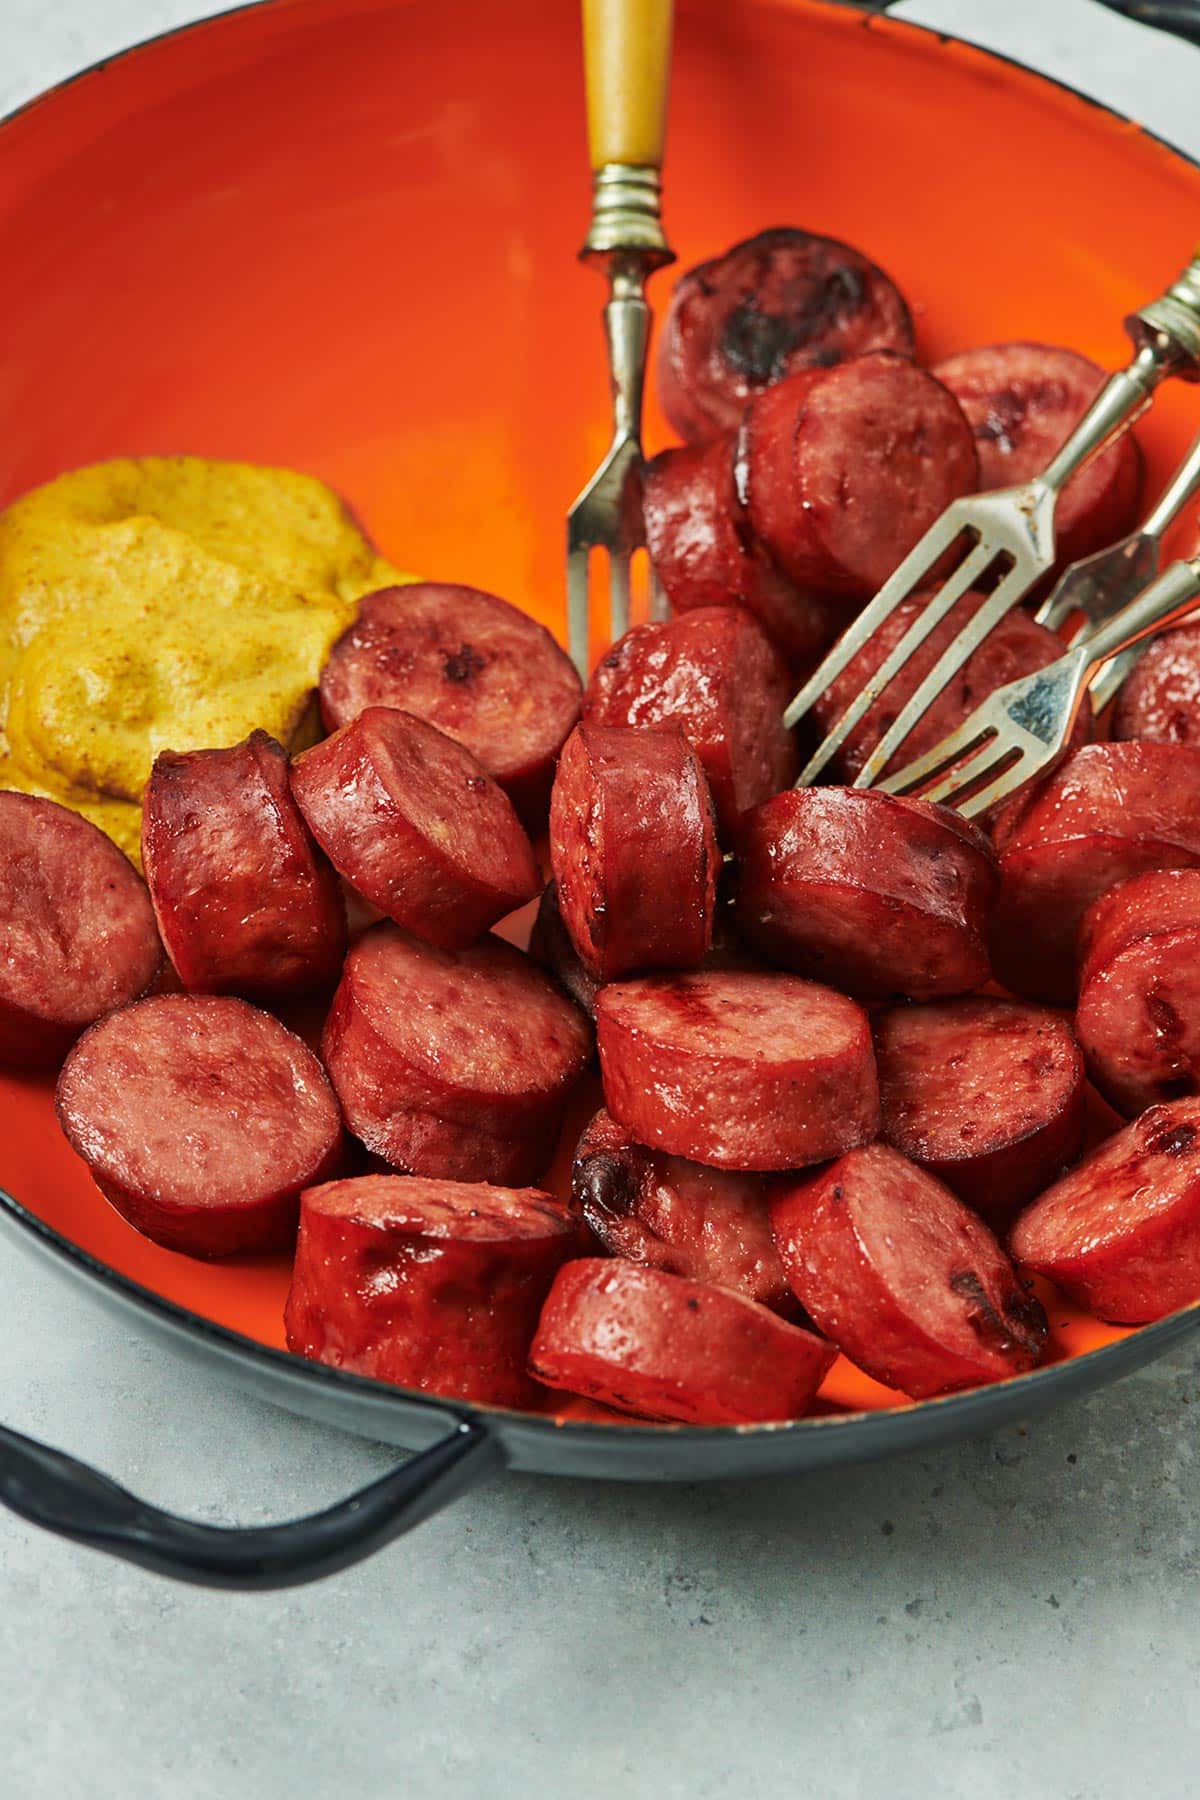 Sliced kielbasa in orange serving bowl with mustard and forks.